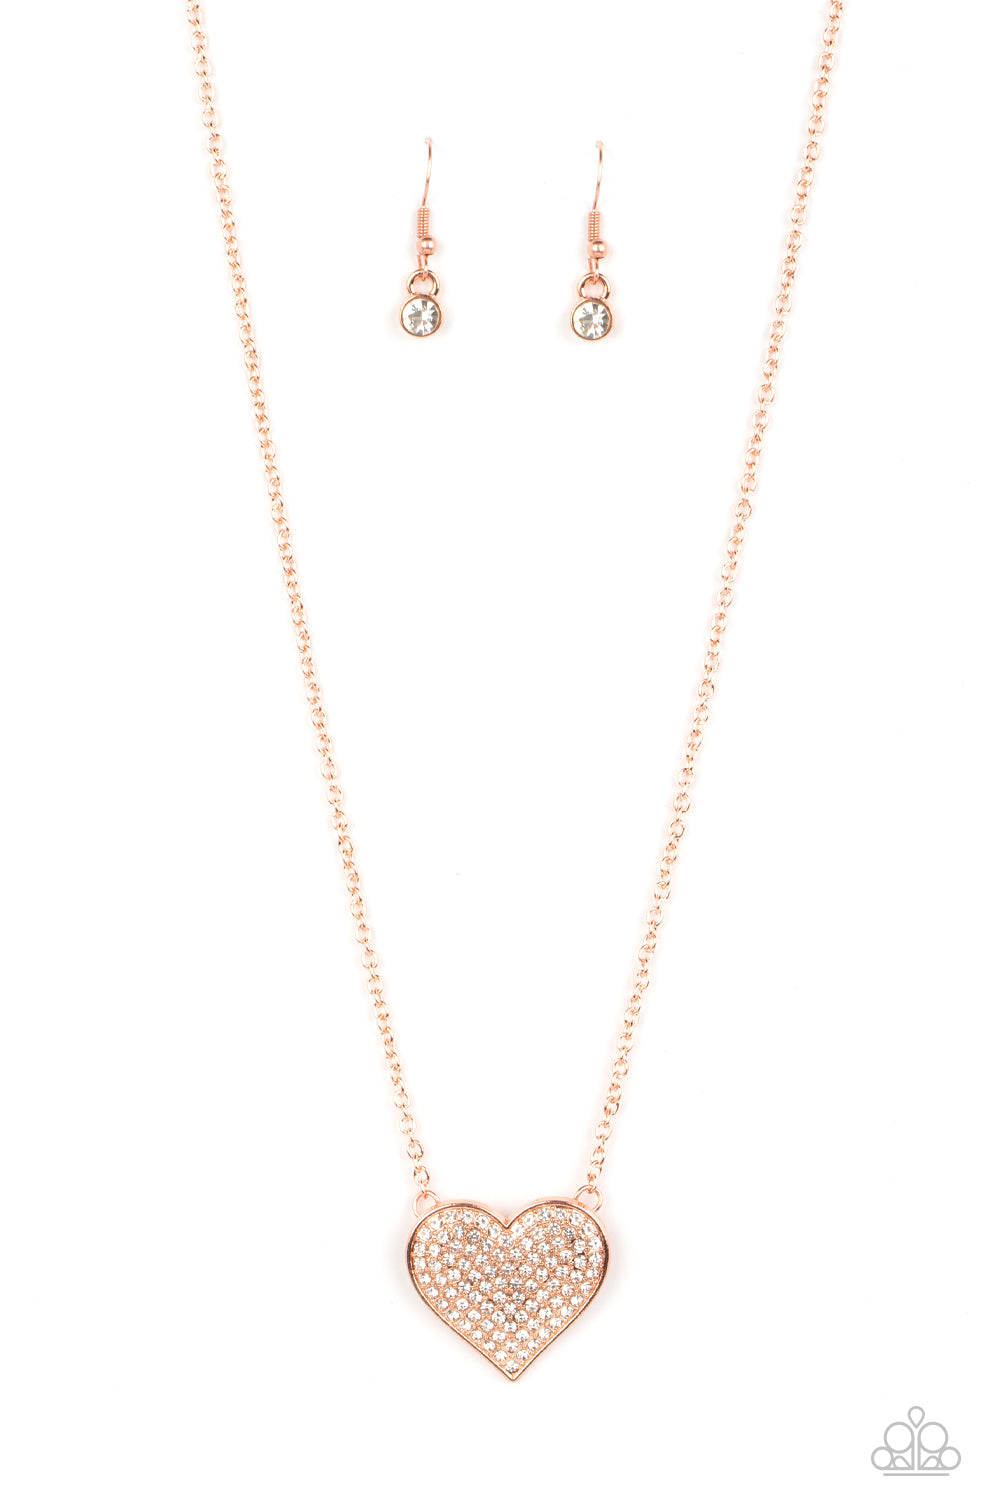 Paparazzi Accessories Spellbinding Sweetheart - Copper Necklace